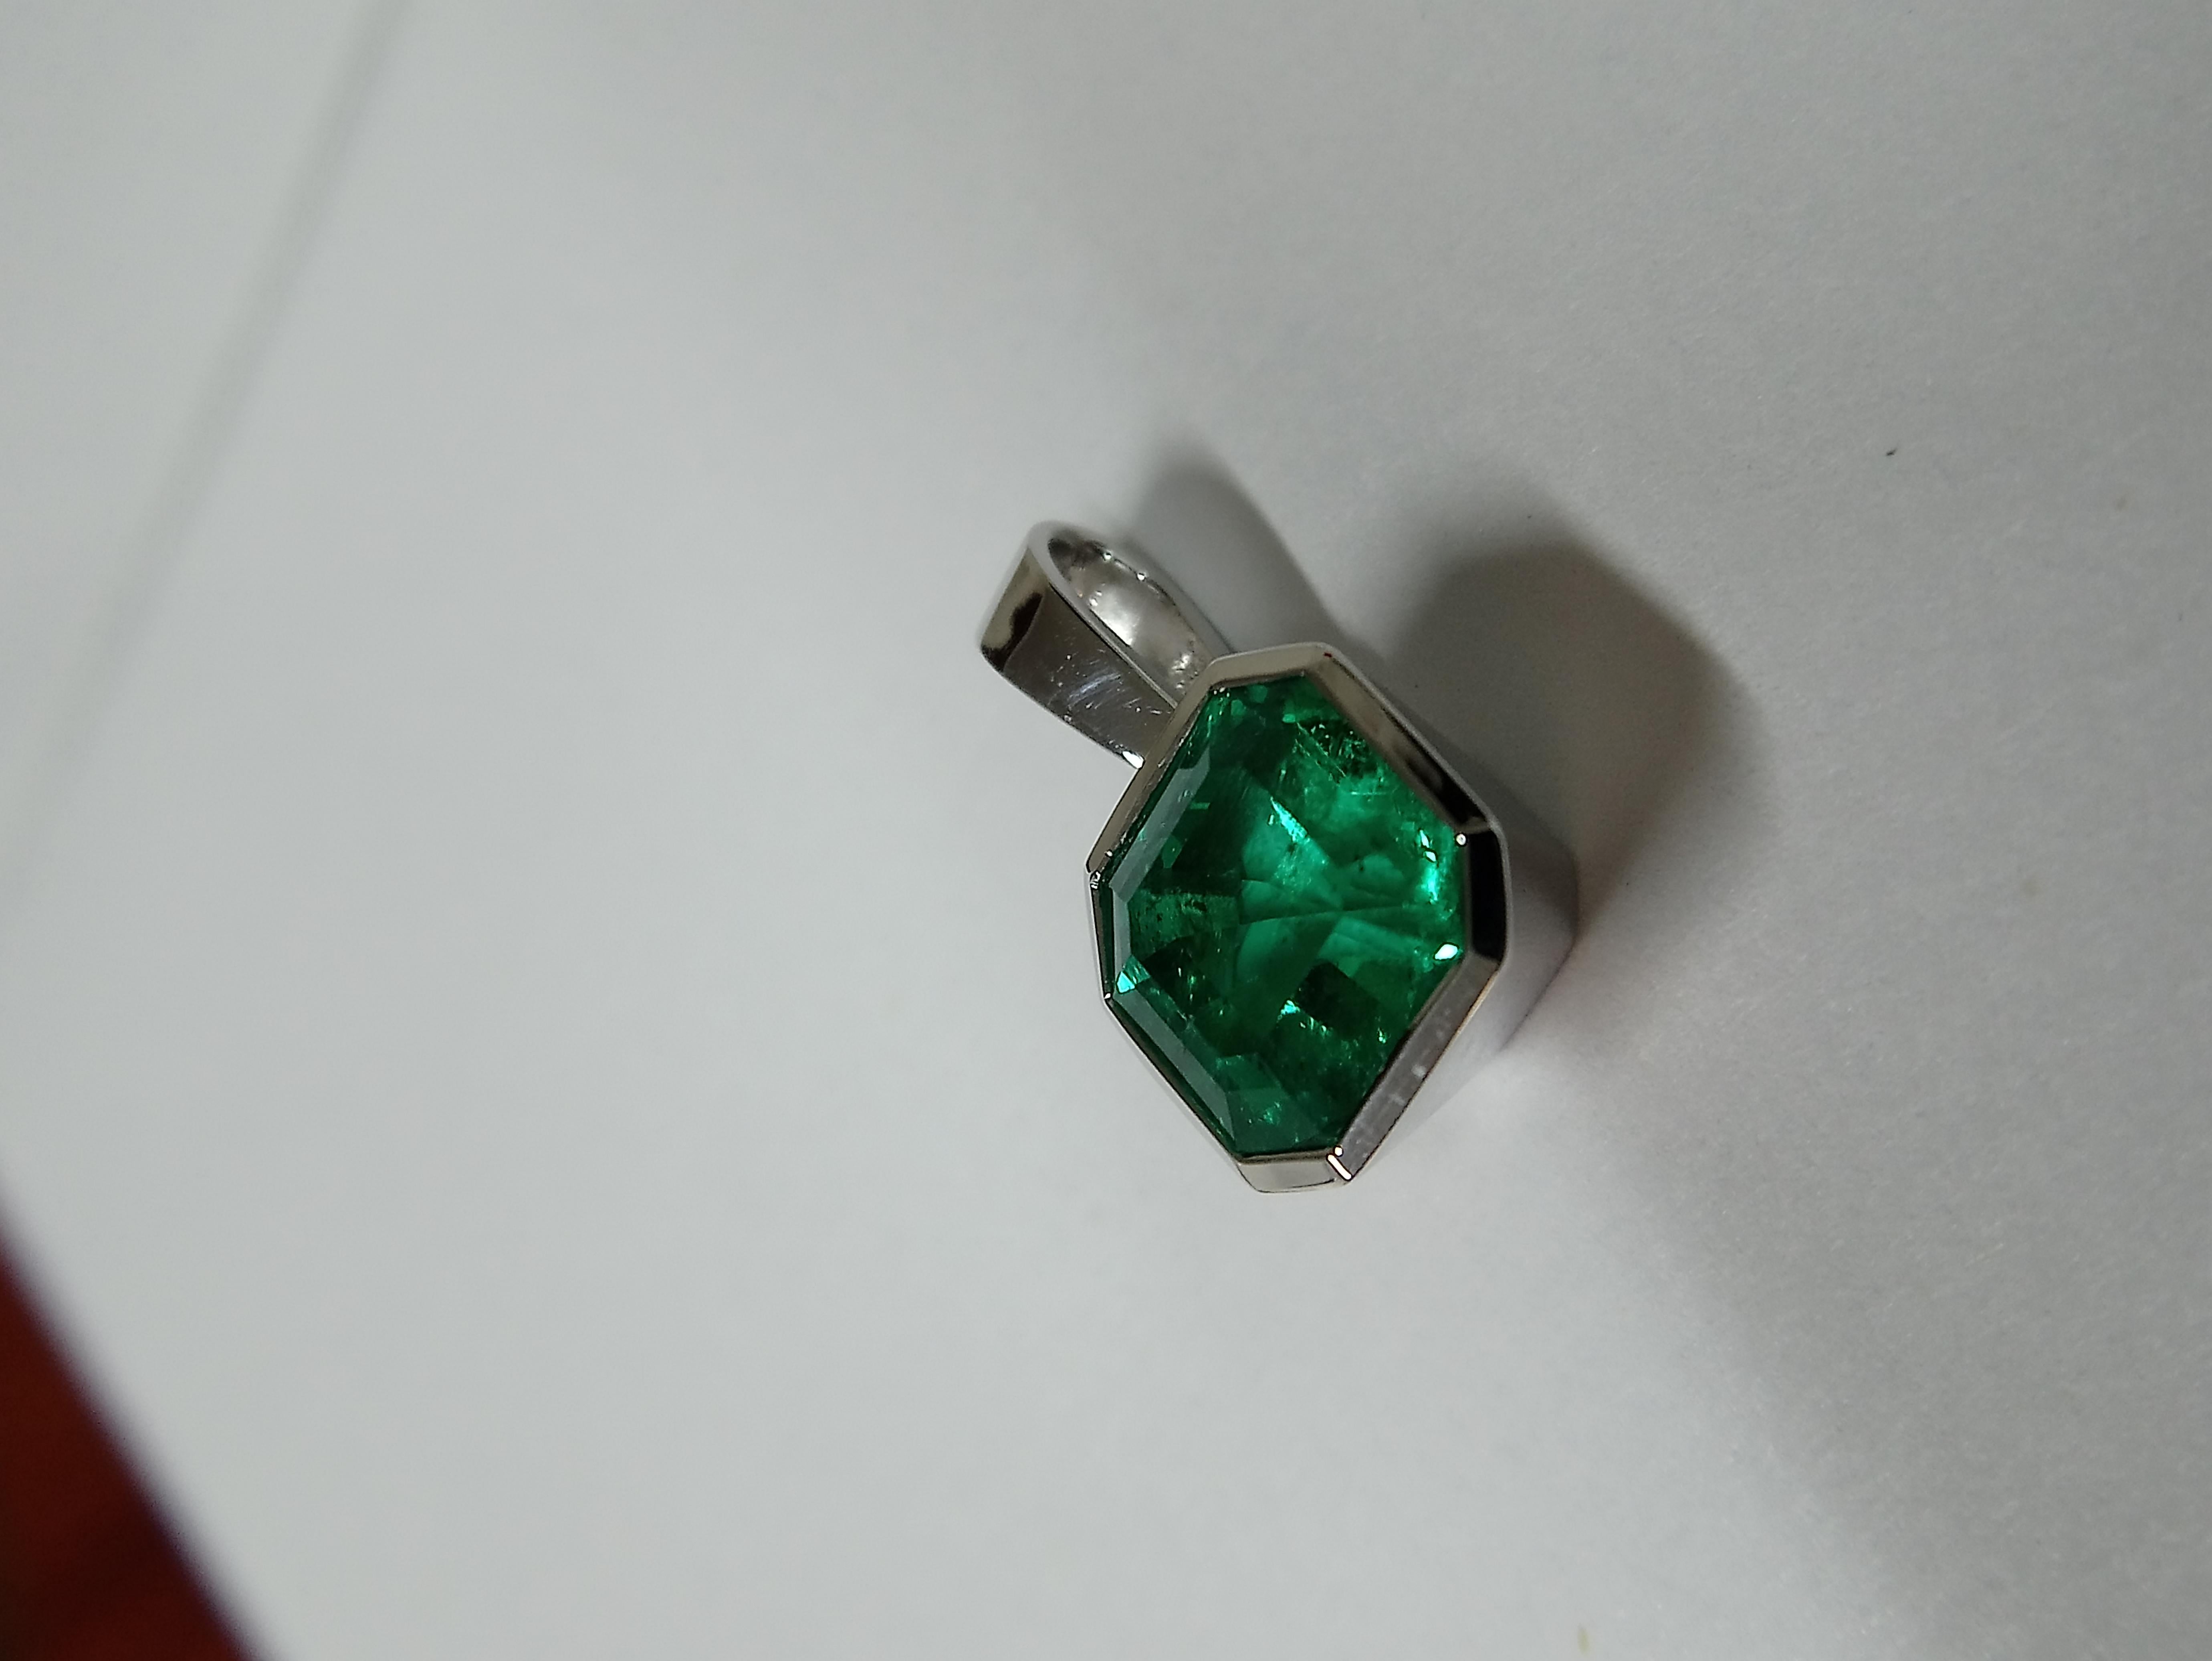 This square cut, 4 carat Colombian emerald pendant is channel set in 18K white gold, giving the stone superb all round protection.  It can be placed on any white gold chain (which can be provided free of charge) or it could be reset as a ring,